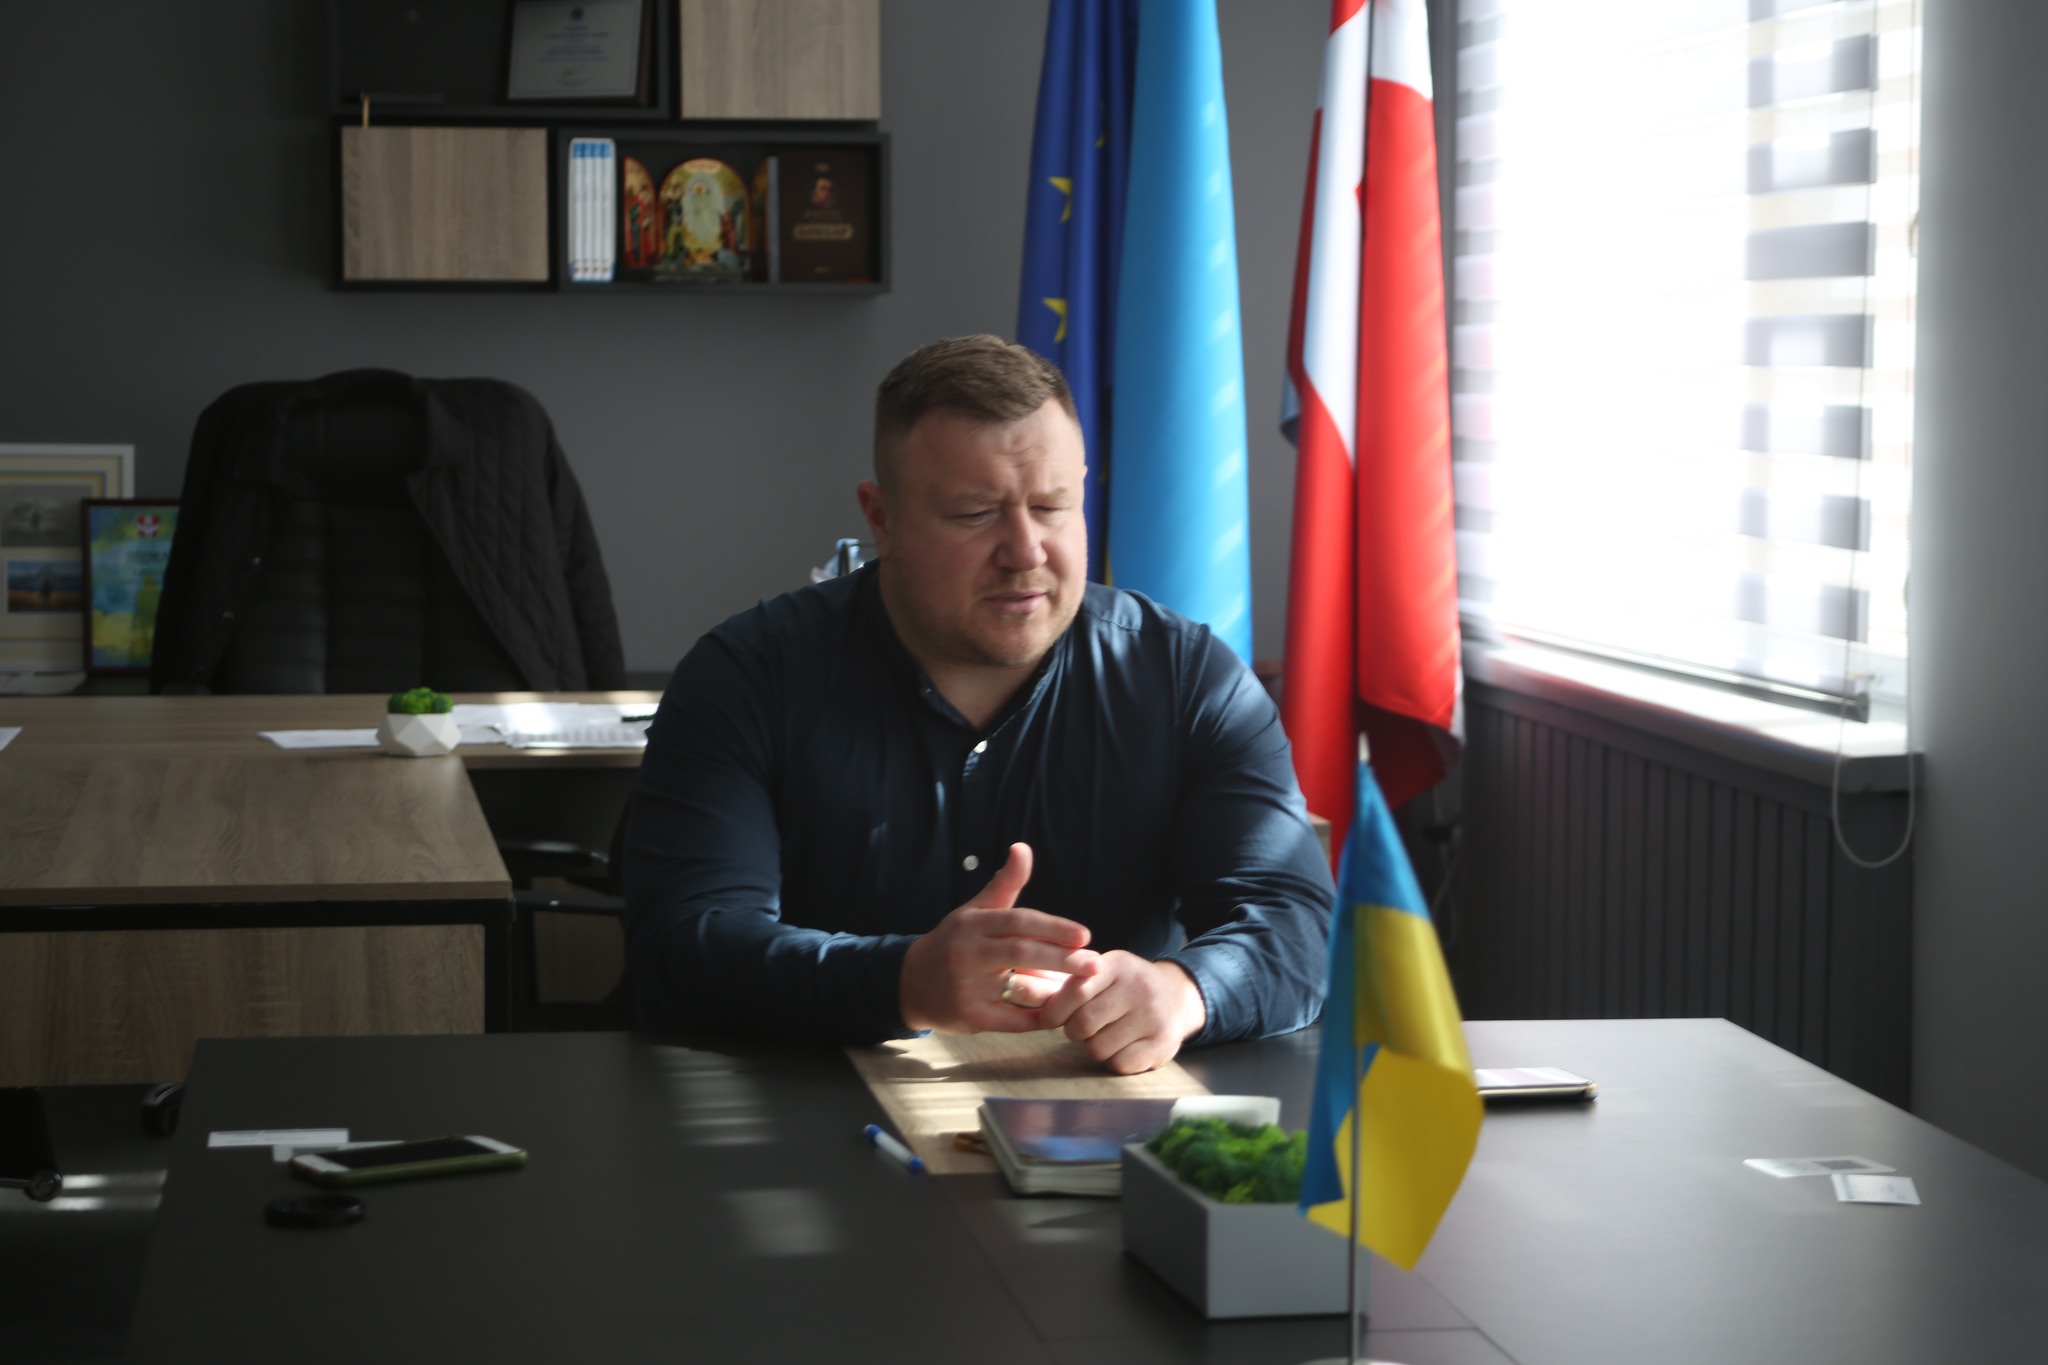 Novovolynsk’s mayor in his cabinet in the city council. Photo by Euromaidan Press ~